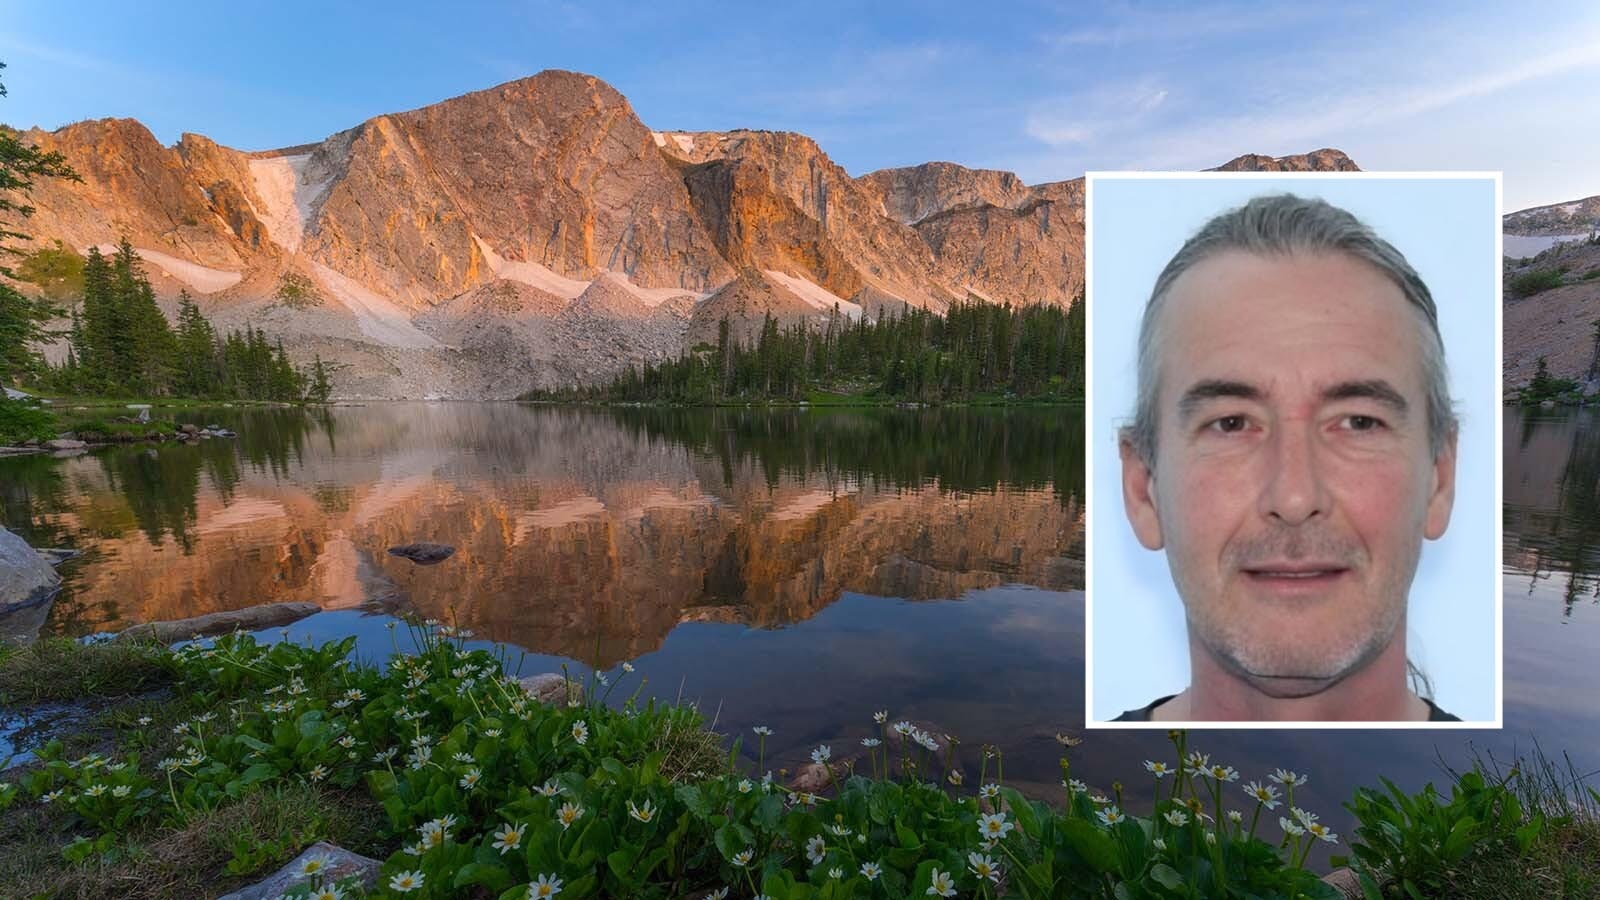 The body of James Bitner of Black Hawk, Colorado, was found over the July 4 holiday at the Mirror Lake Recreation Area in Albany County, Wyoming.